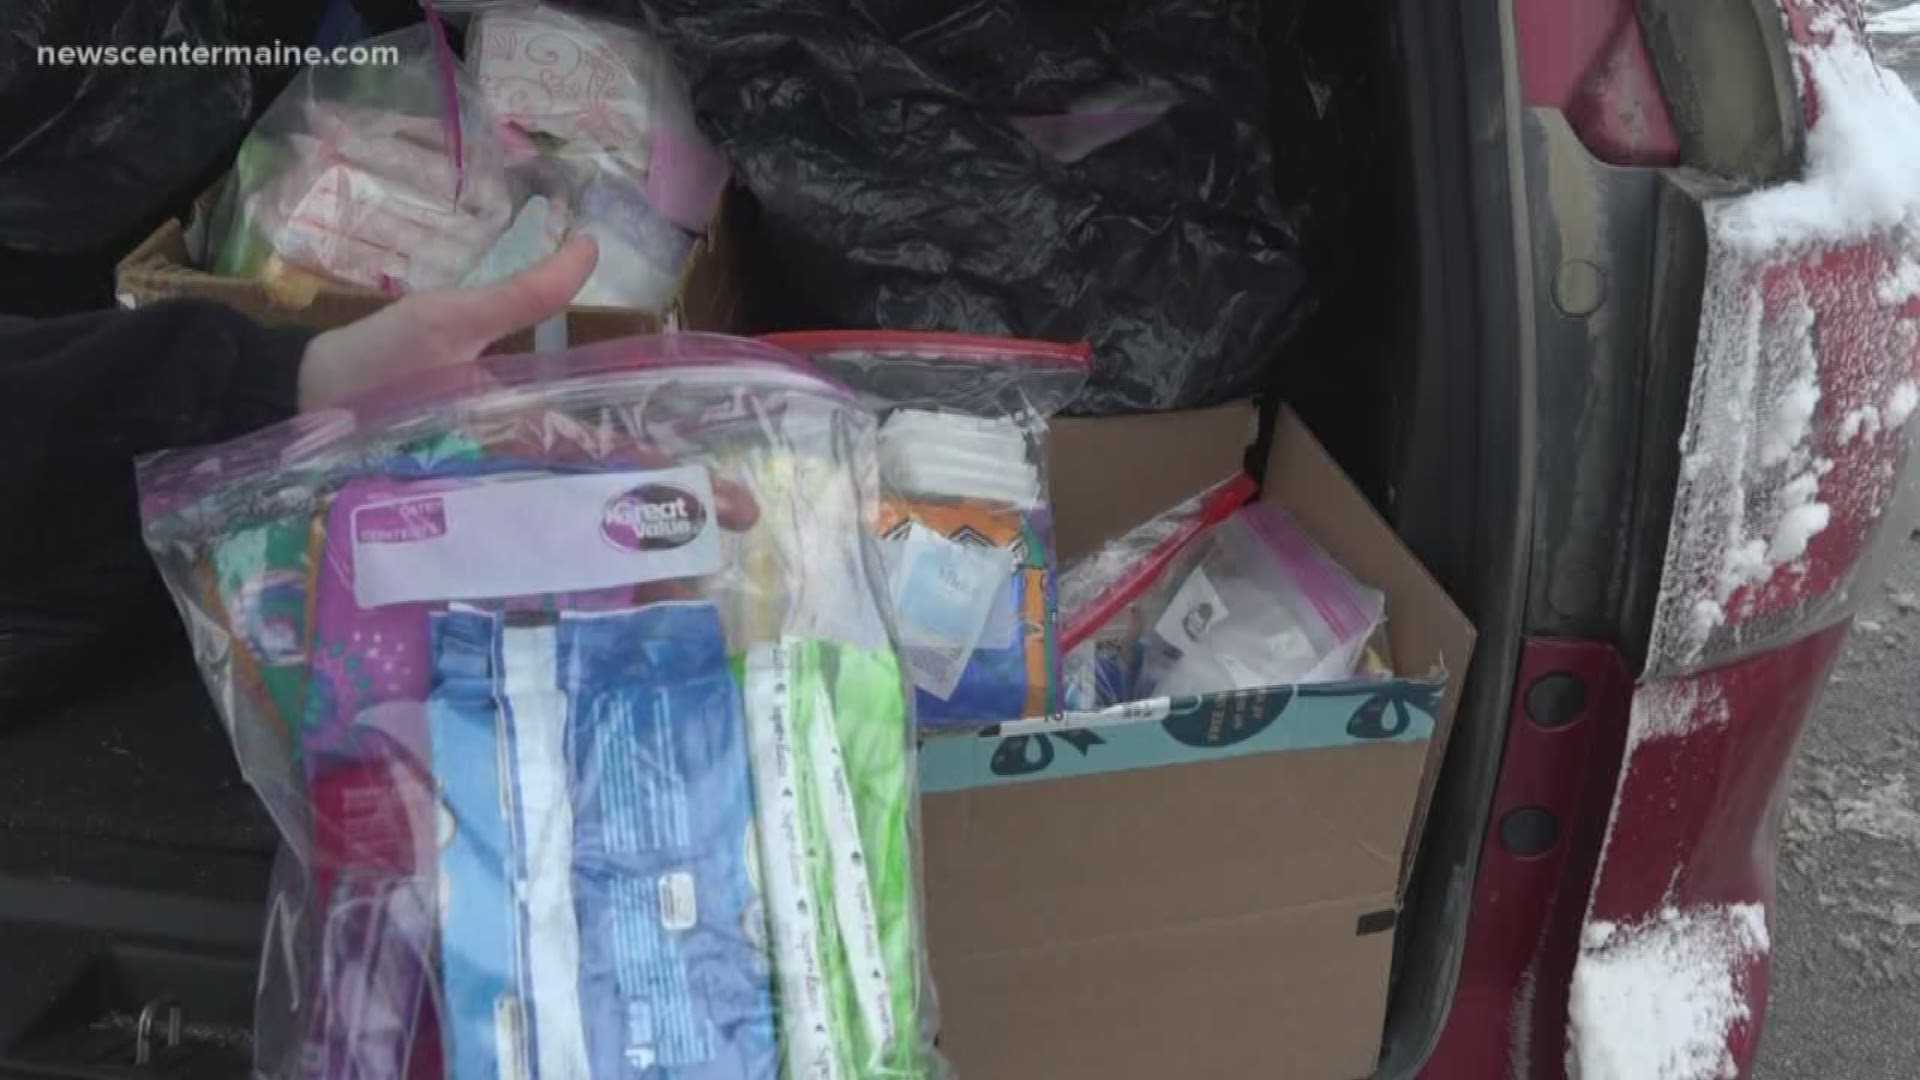 The Maine Legislature voted Thursday to remove sales tax from feminine hygiene products.